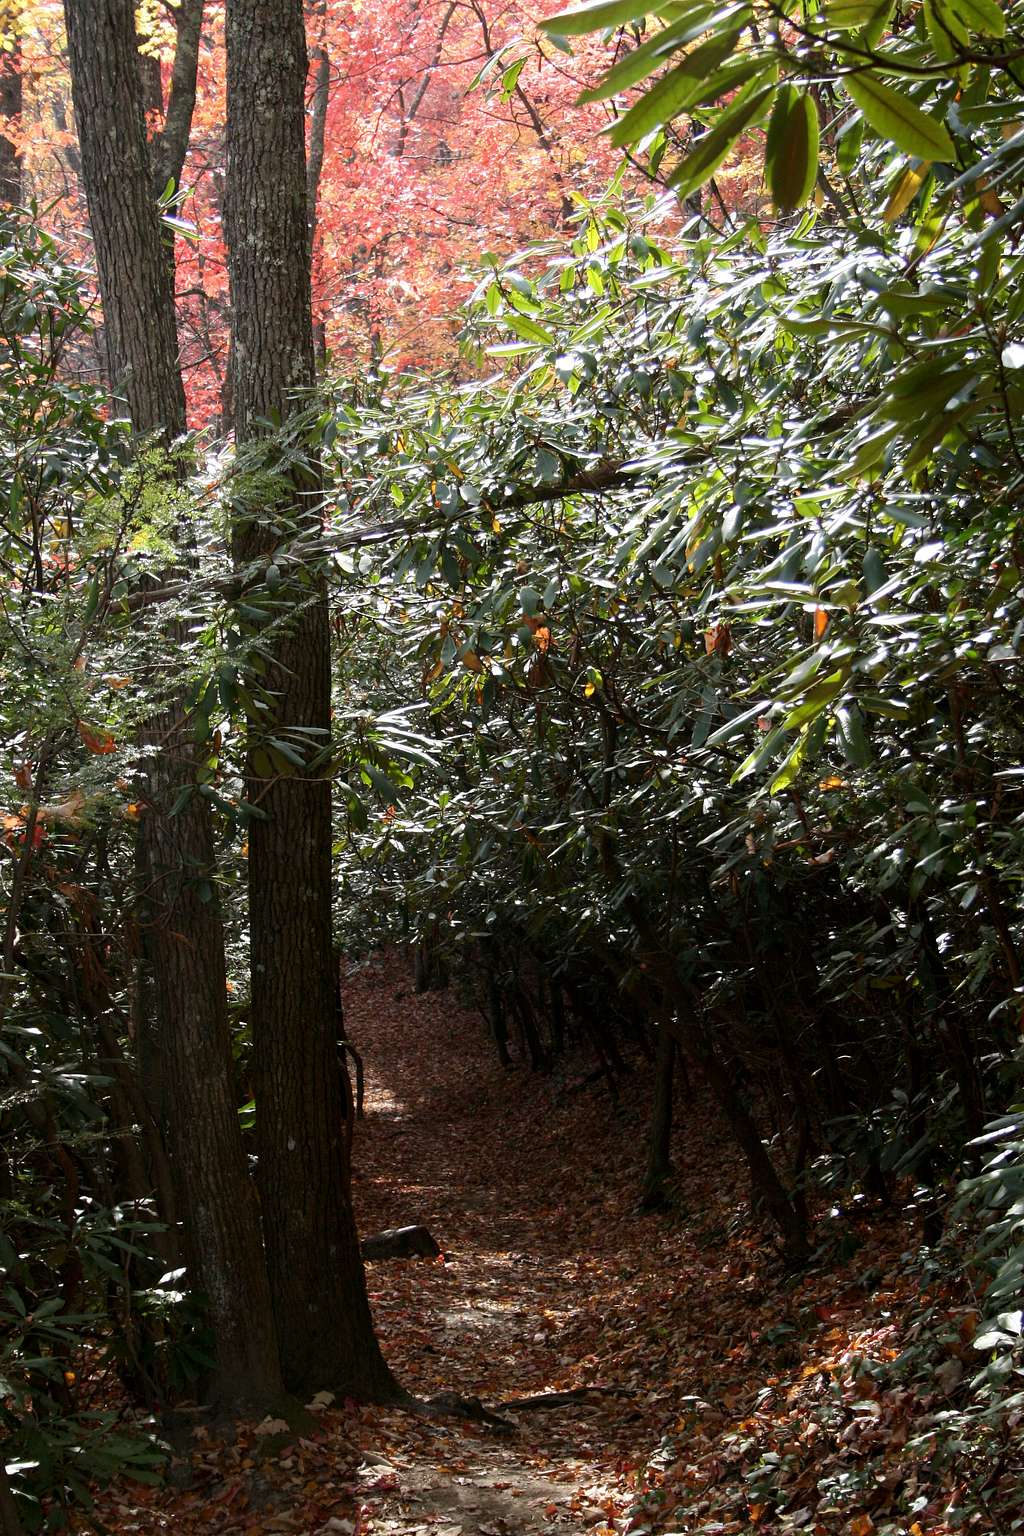 Rhododendron Tunnel on Gabes Mountain